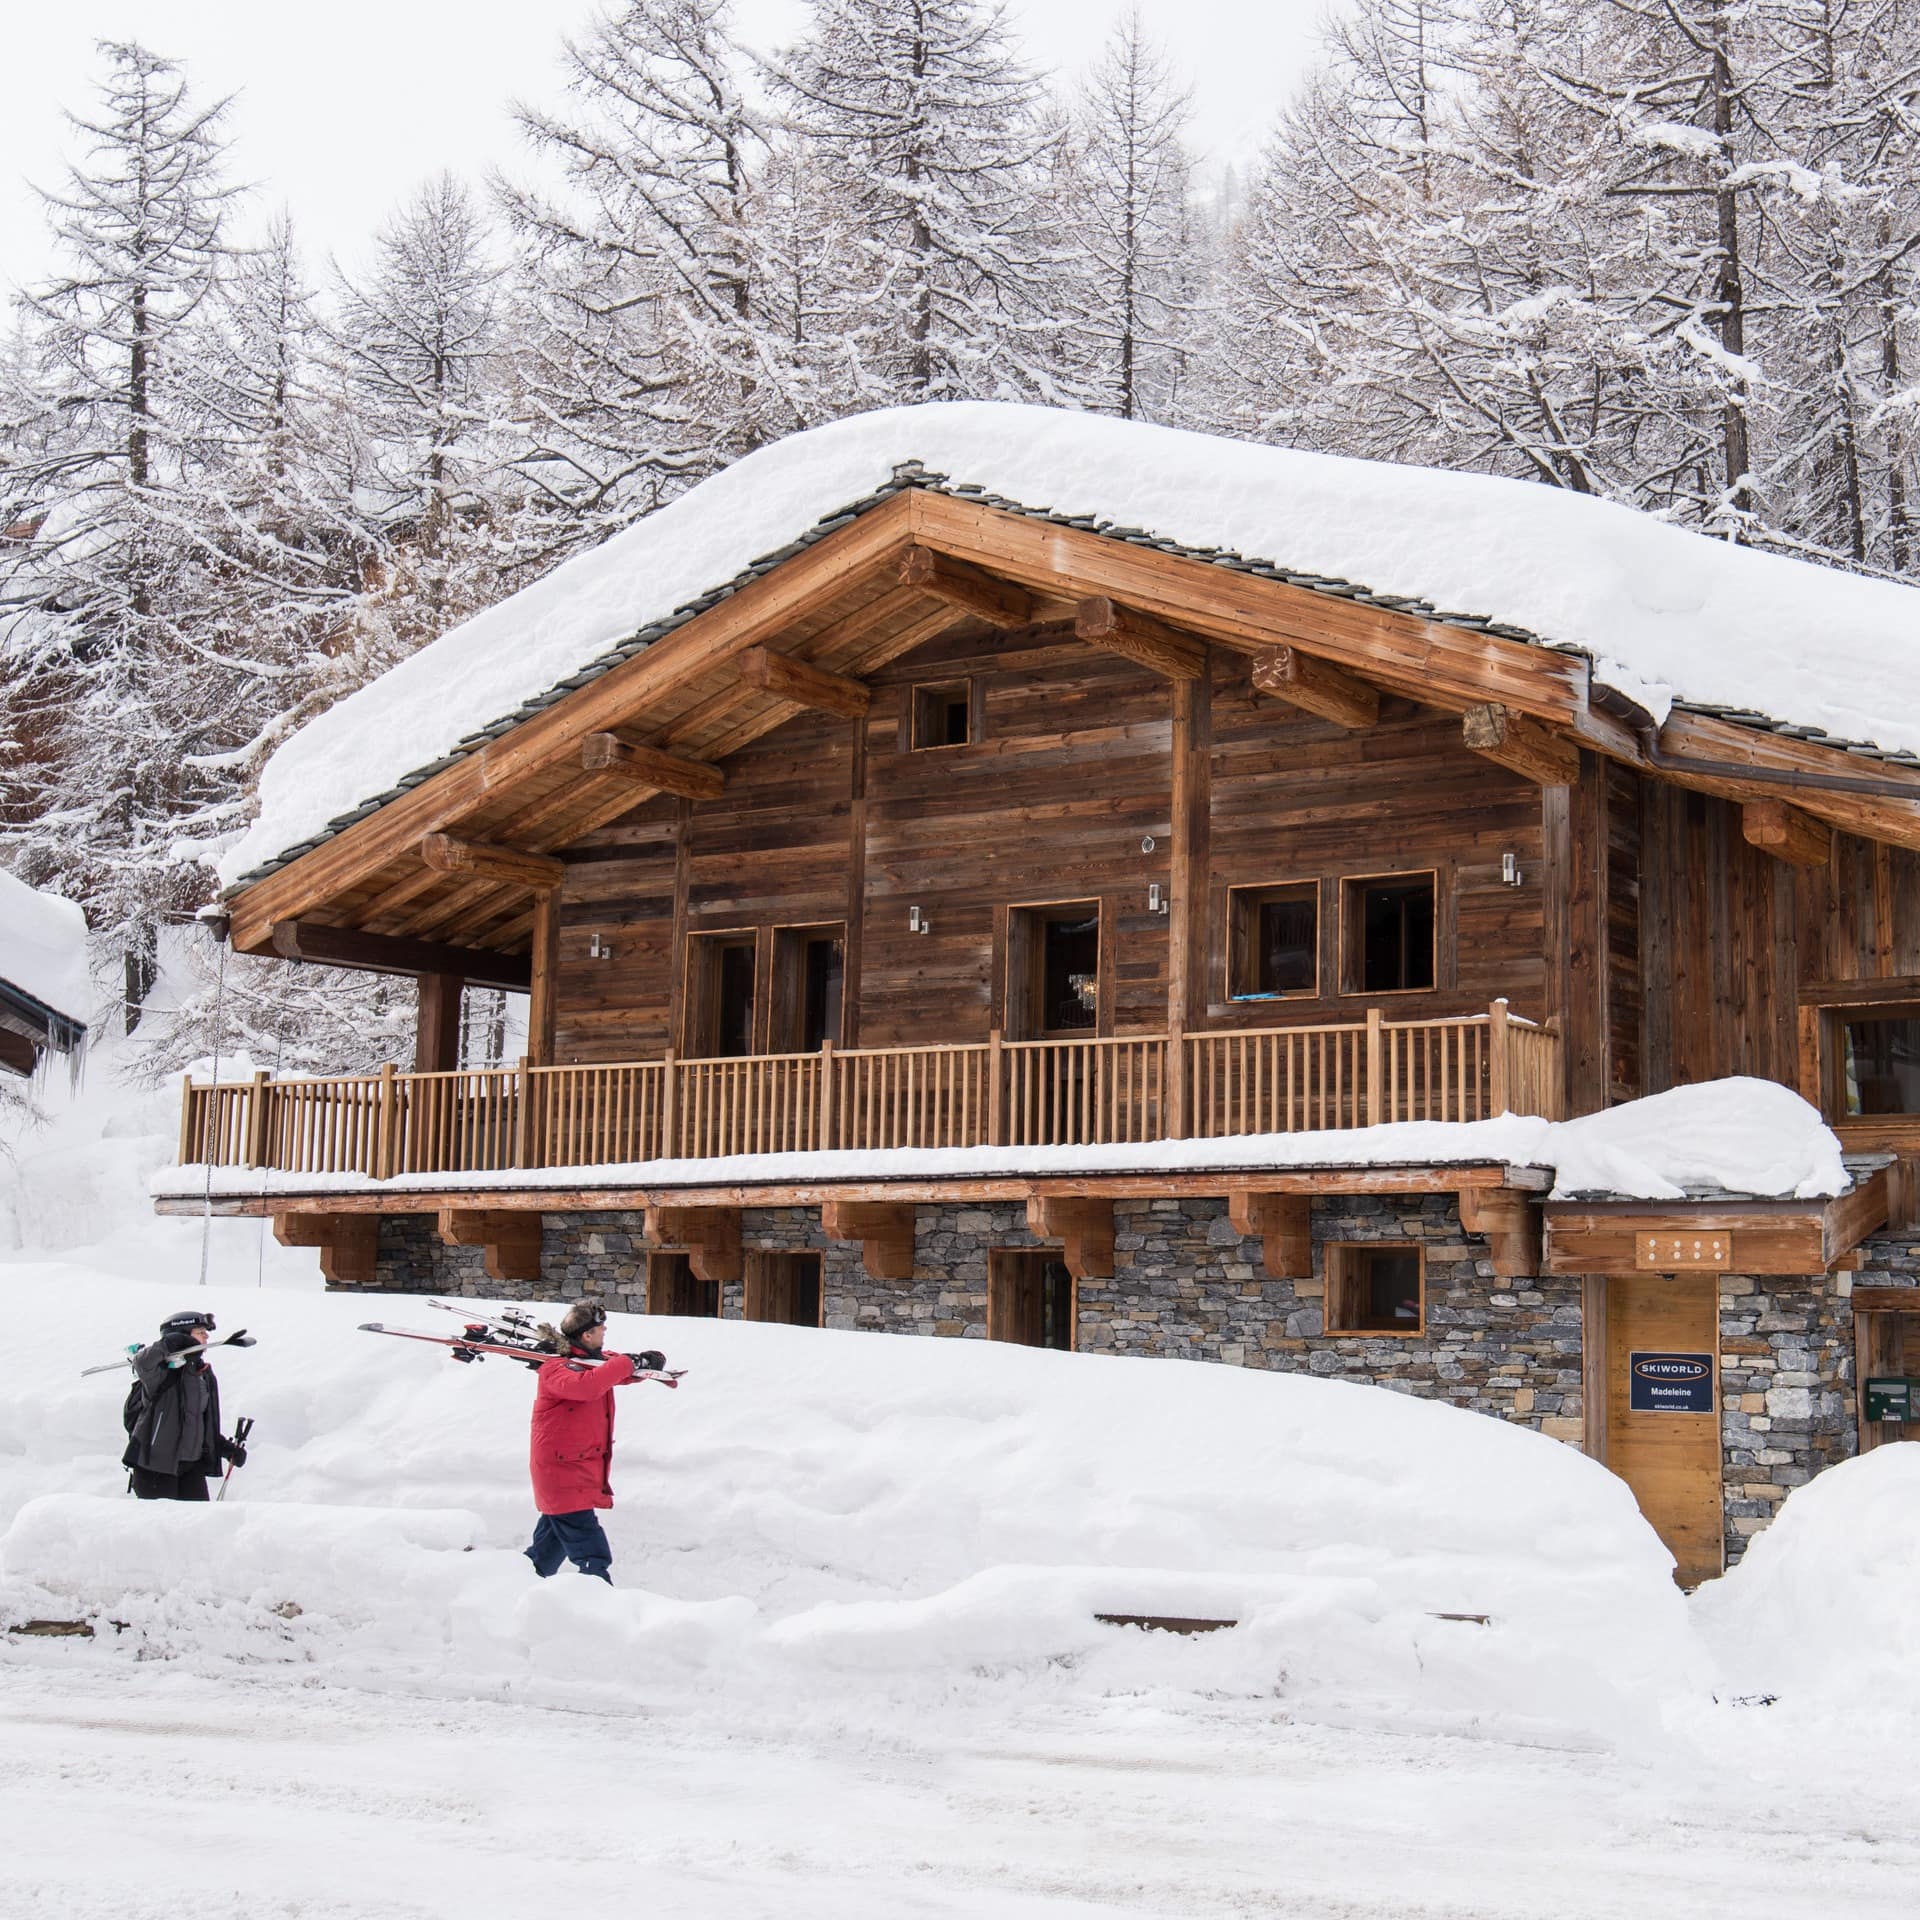 A charming, snow-covered luxury ski chalet in Val-d'Isère, France